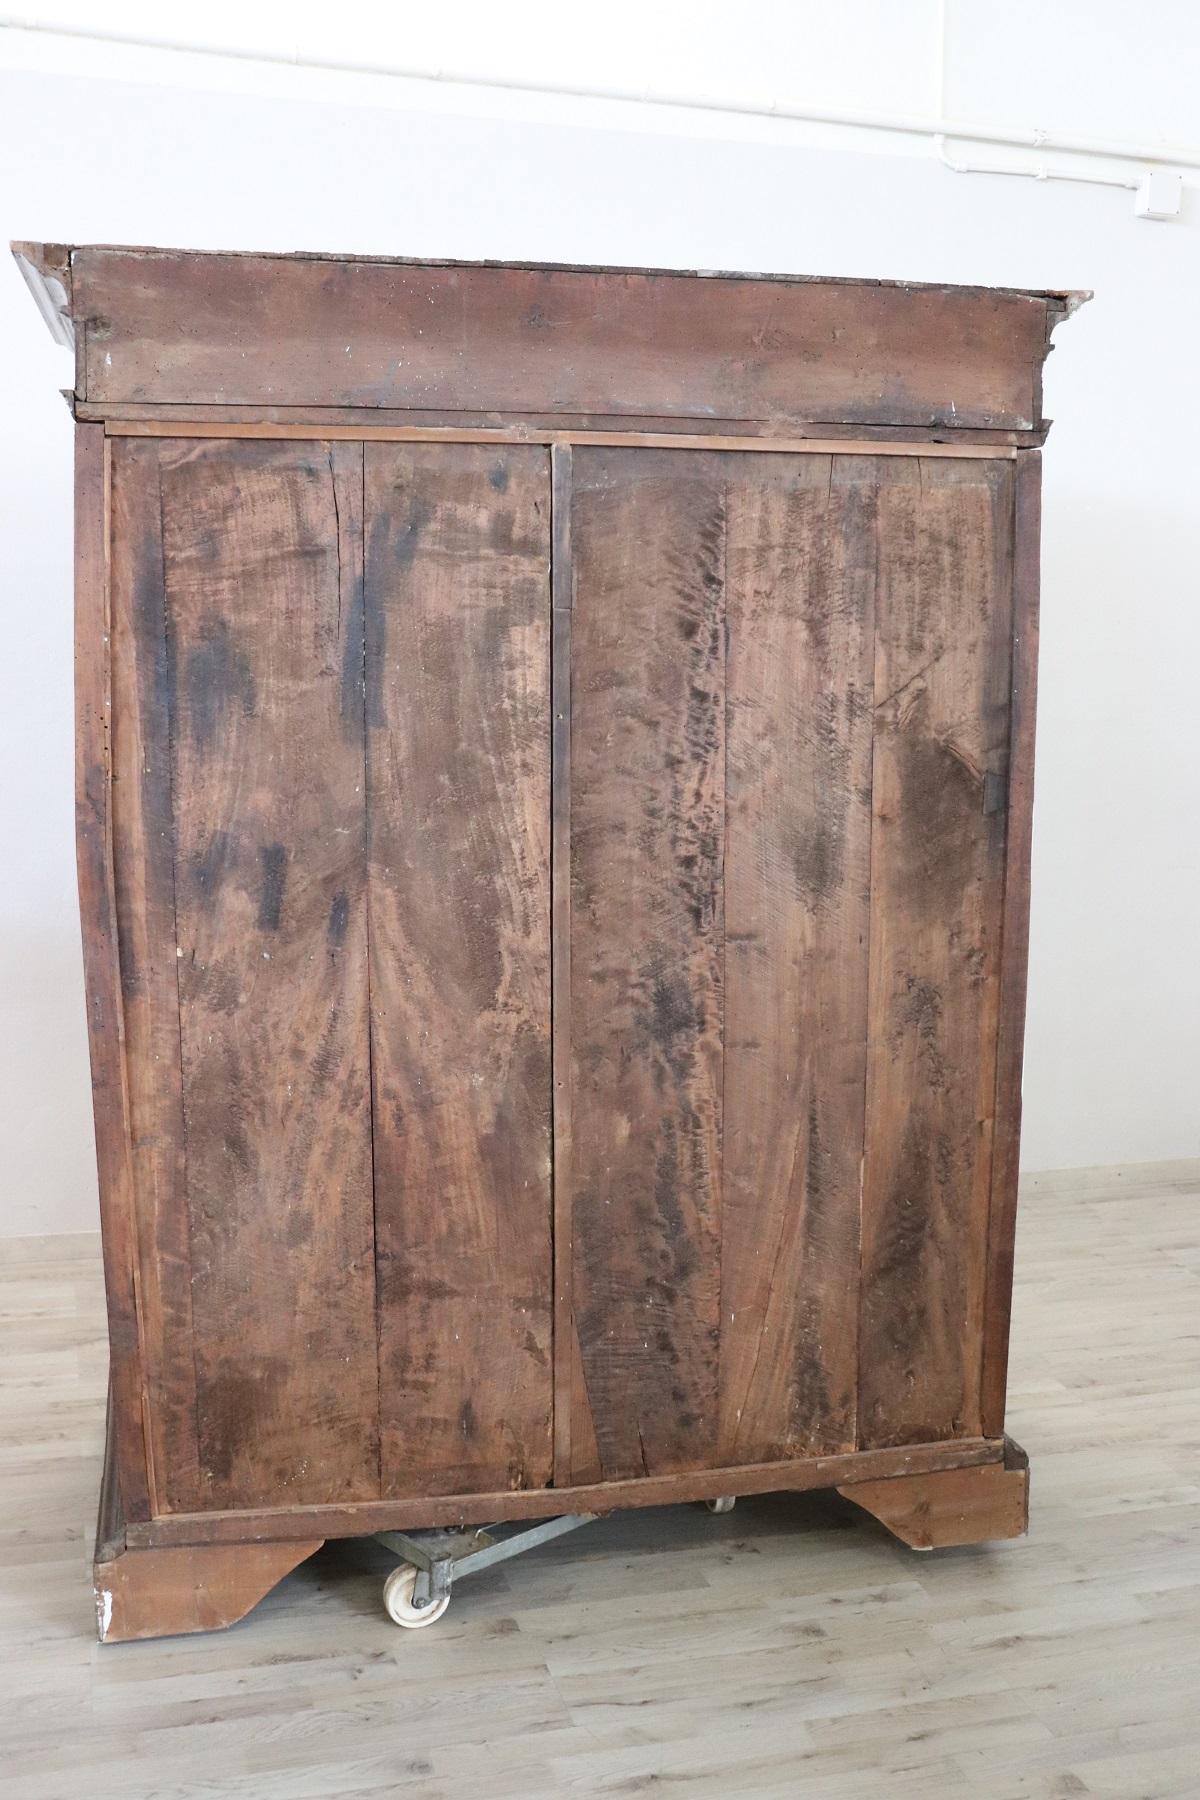 Rare and important antique wardrobe in solid walnut made in the late 17th century Italian Baroque Louis XIV. The line is in fact typical of this period of high period that wanted this type of furnishings of great grandeur made of solid walnut wood